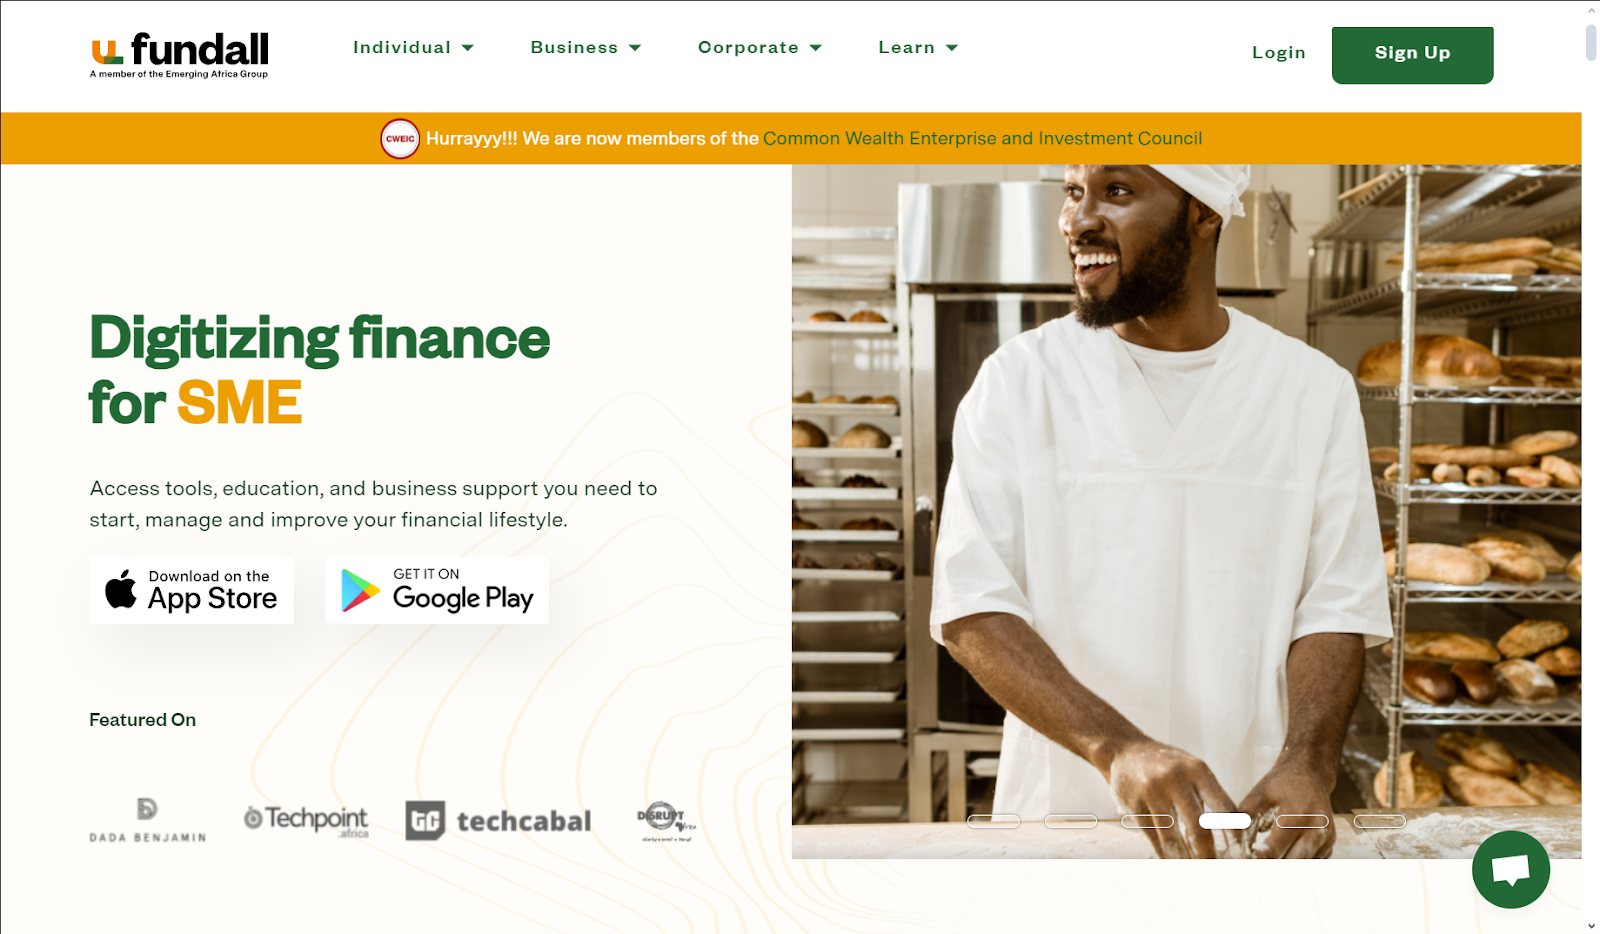 Fundall - One of the Top Virtual Dollar Cards in Nigeria